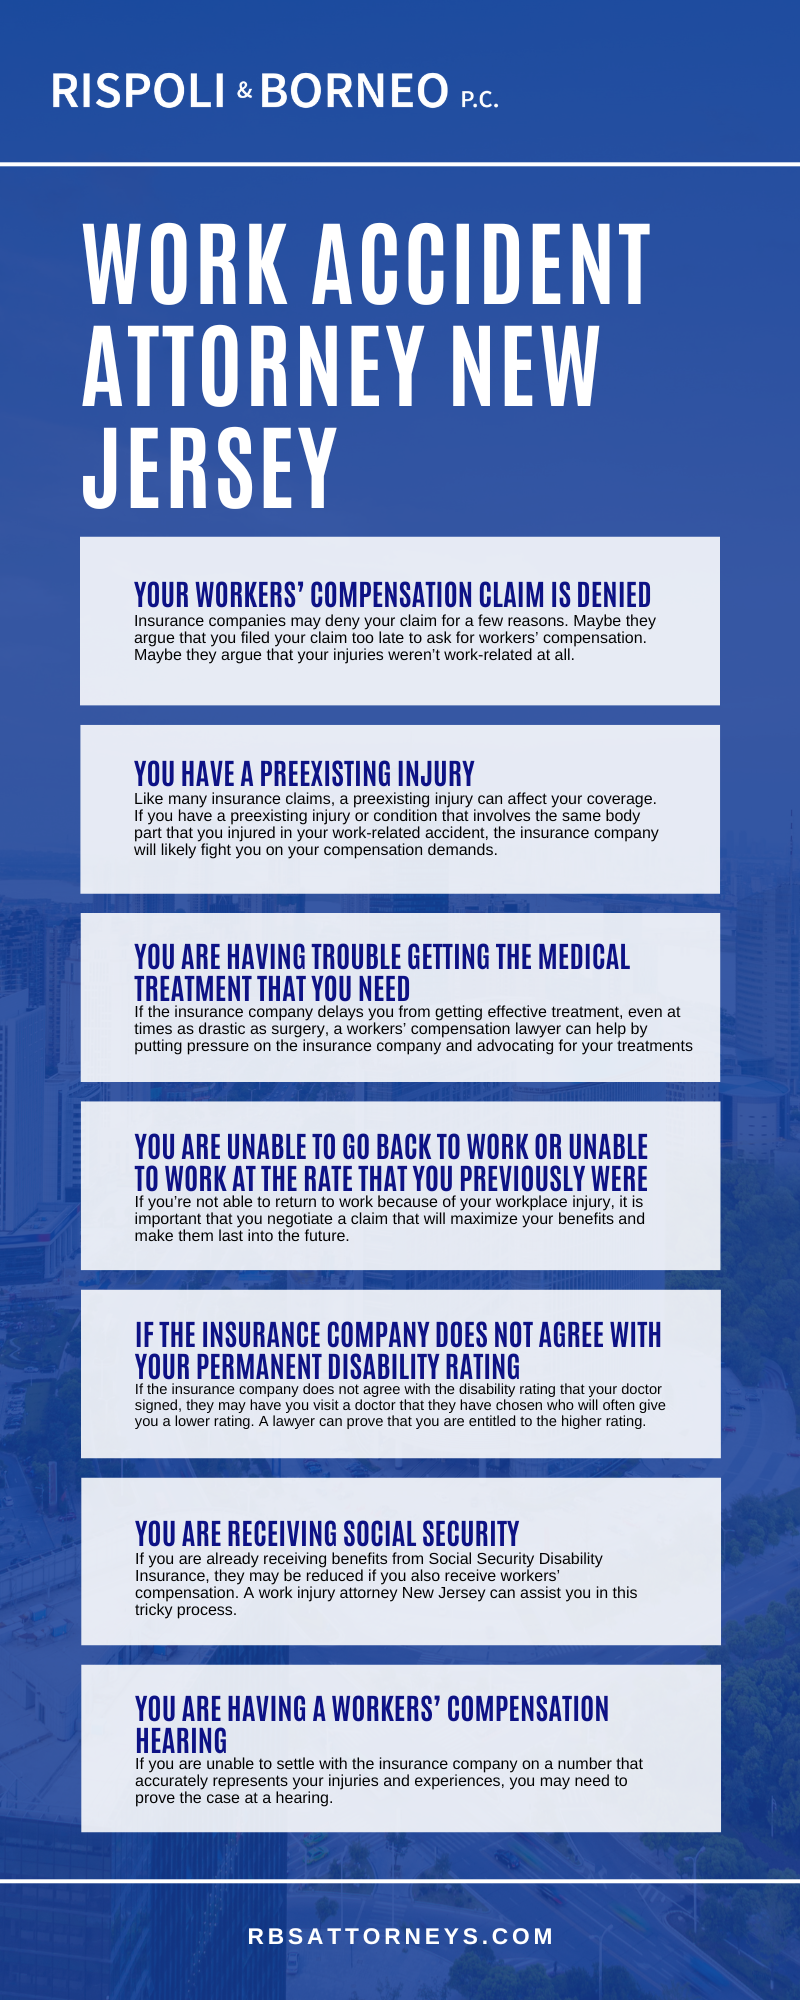 Work Accident Attorney New Jersey Infographic